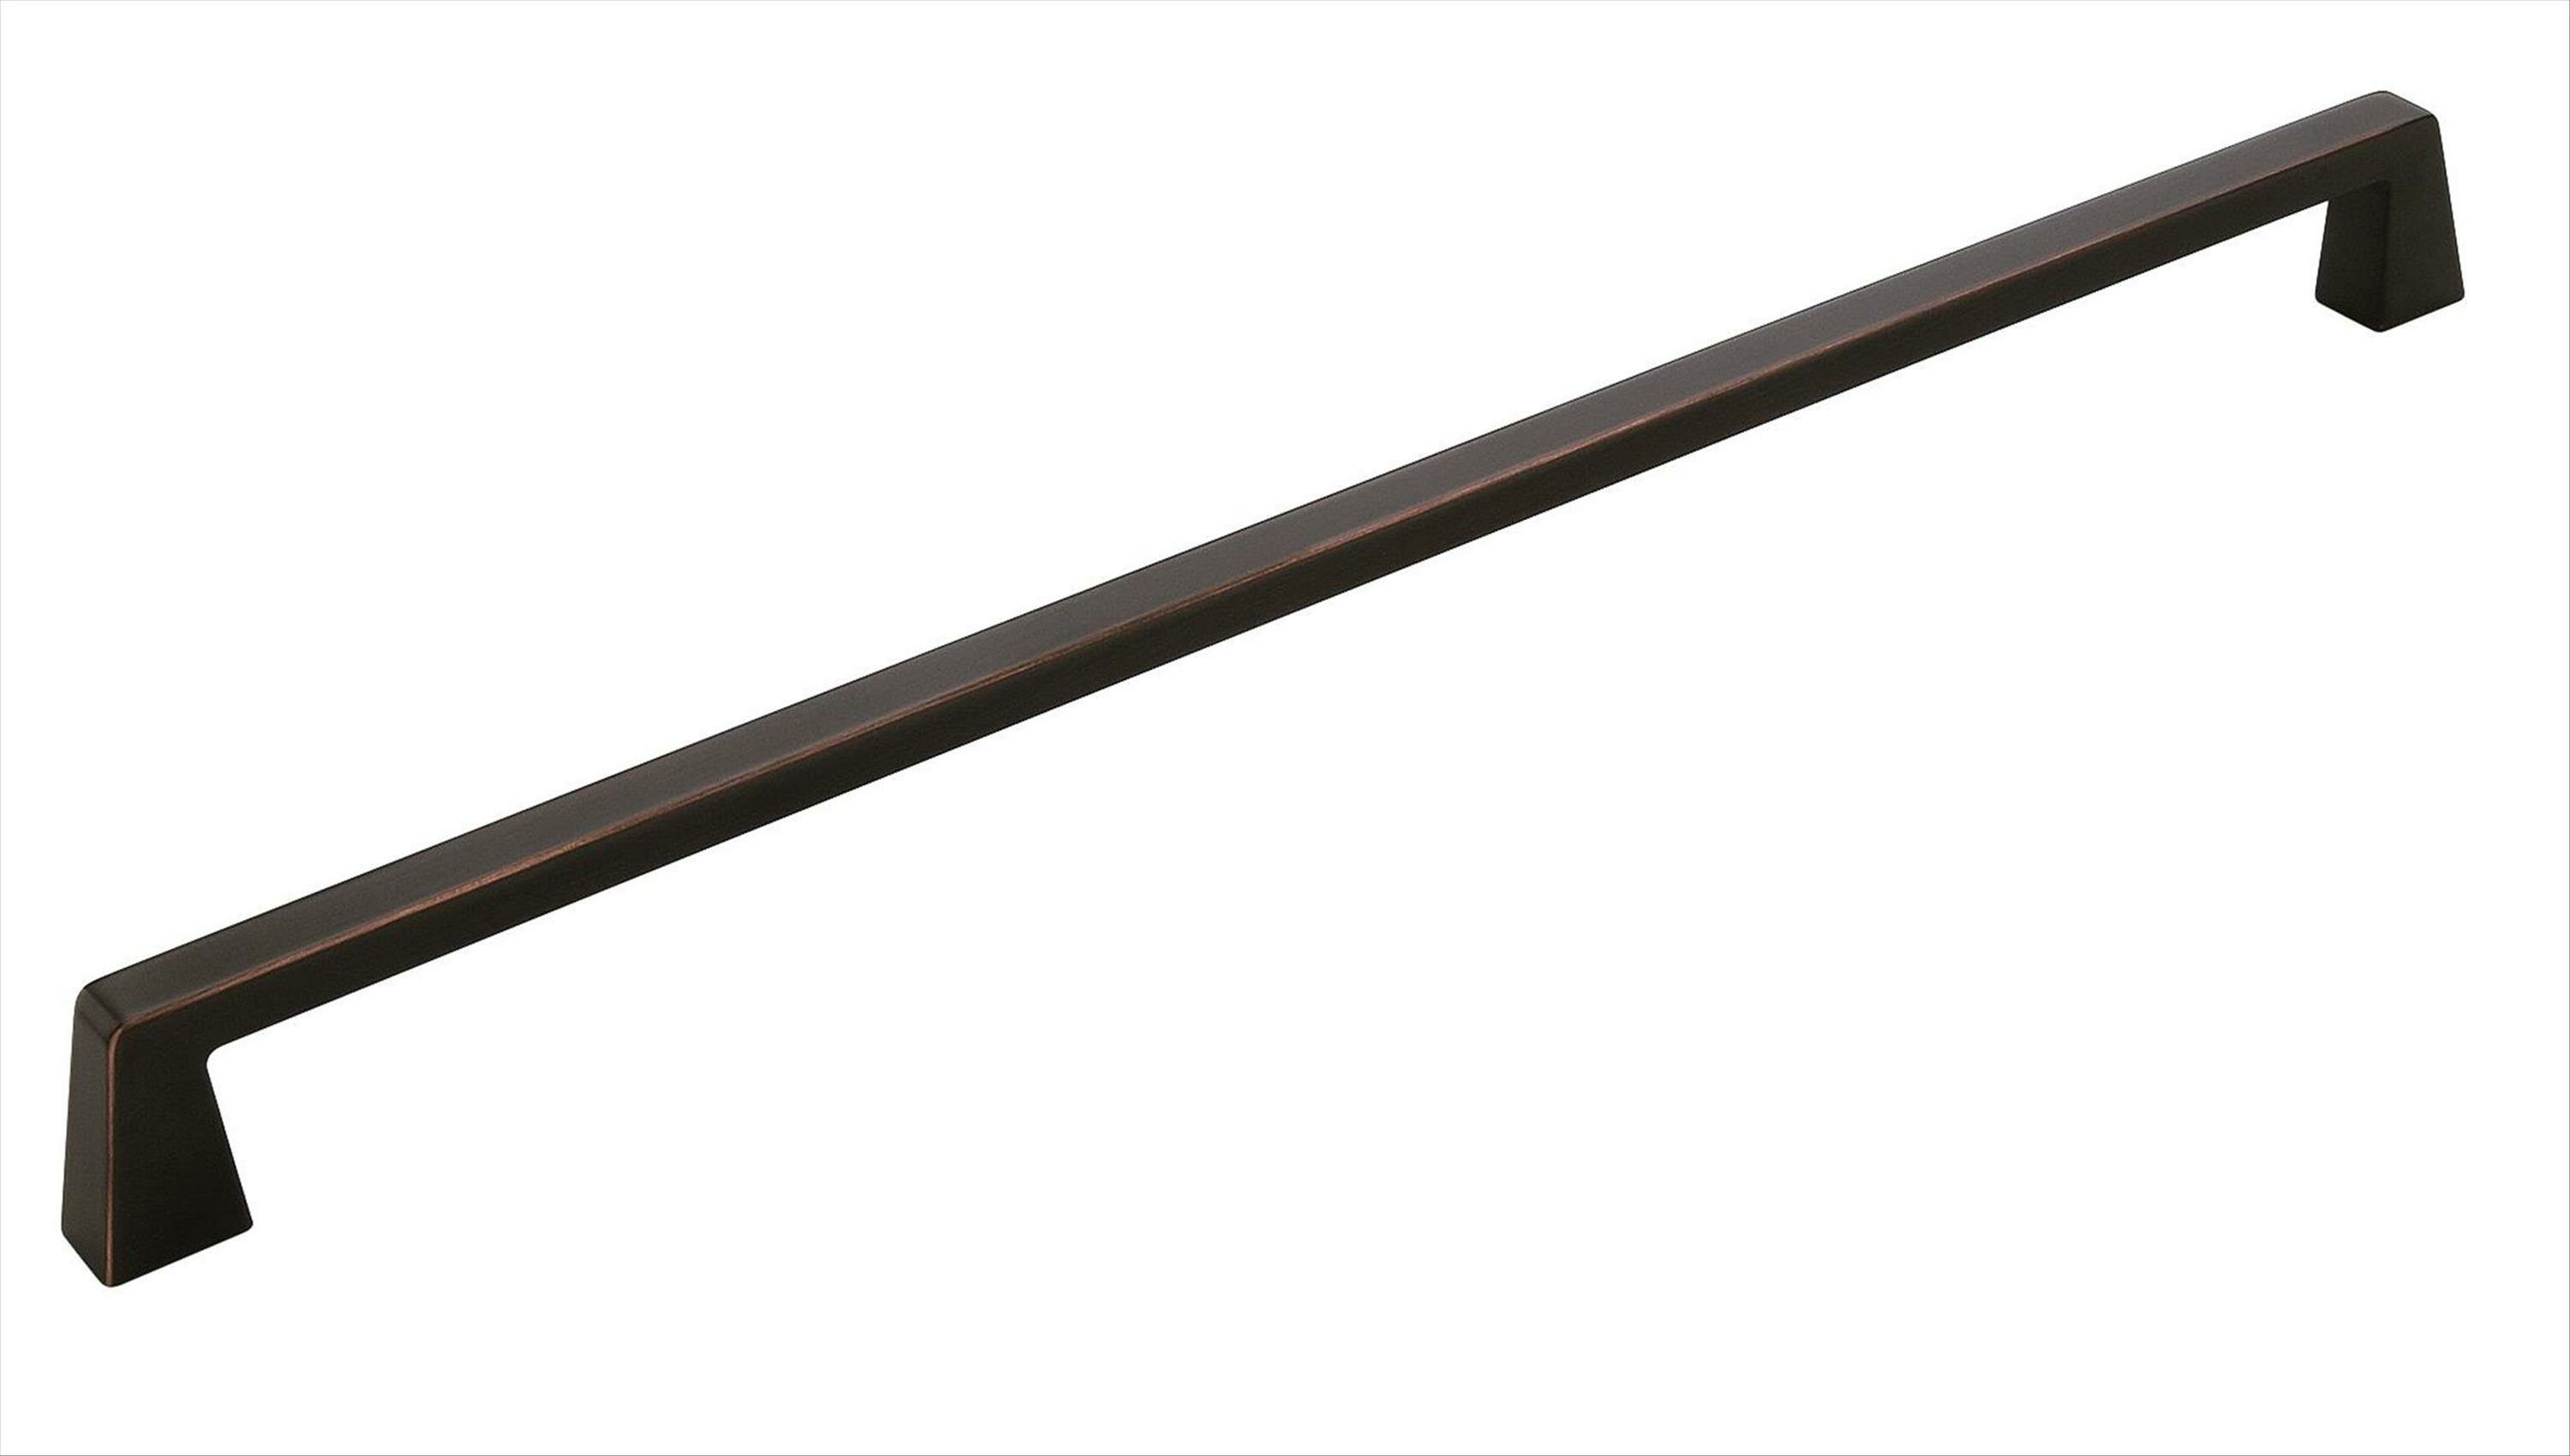 Cabinet Hardware Appliance Pulls pq15 Brushed Oil Rubbed Bronze Handles 12" 